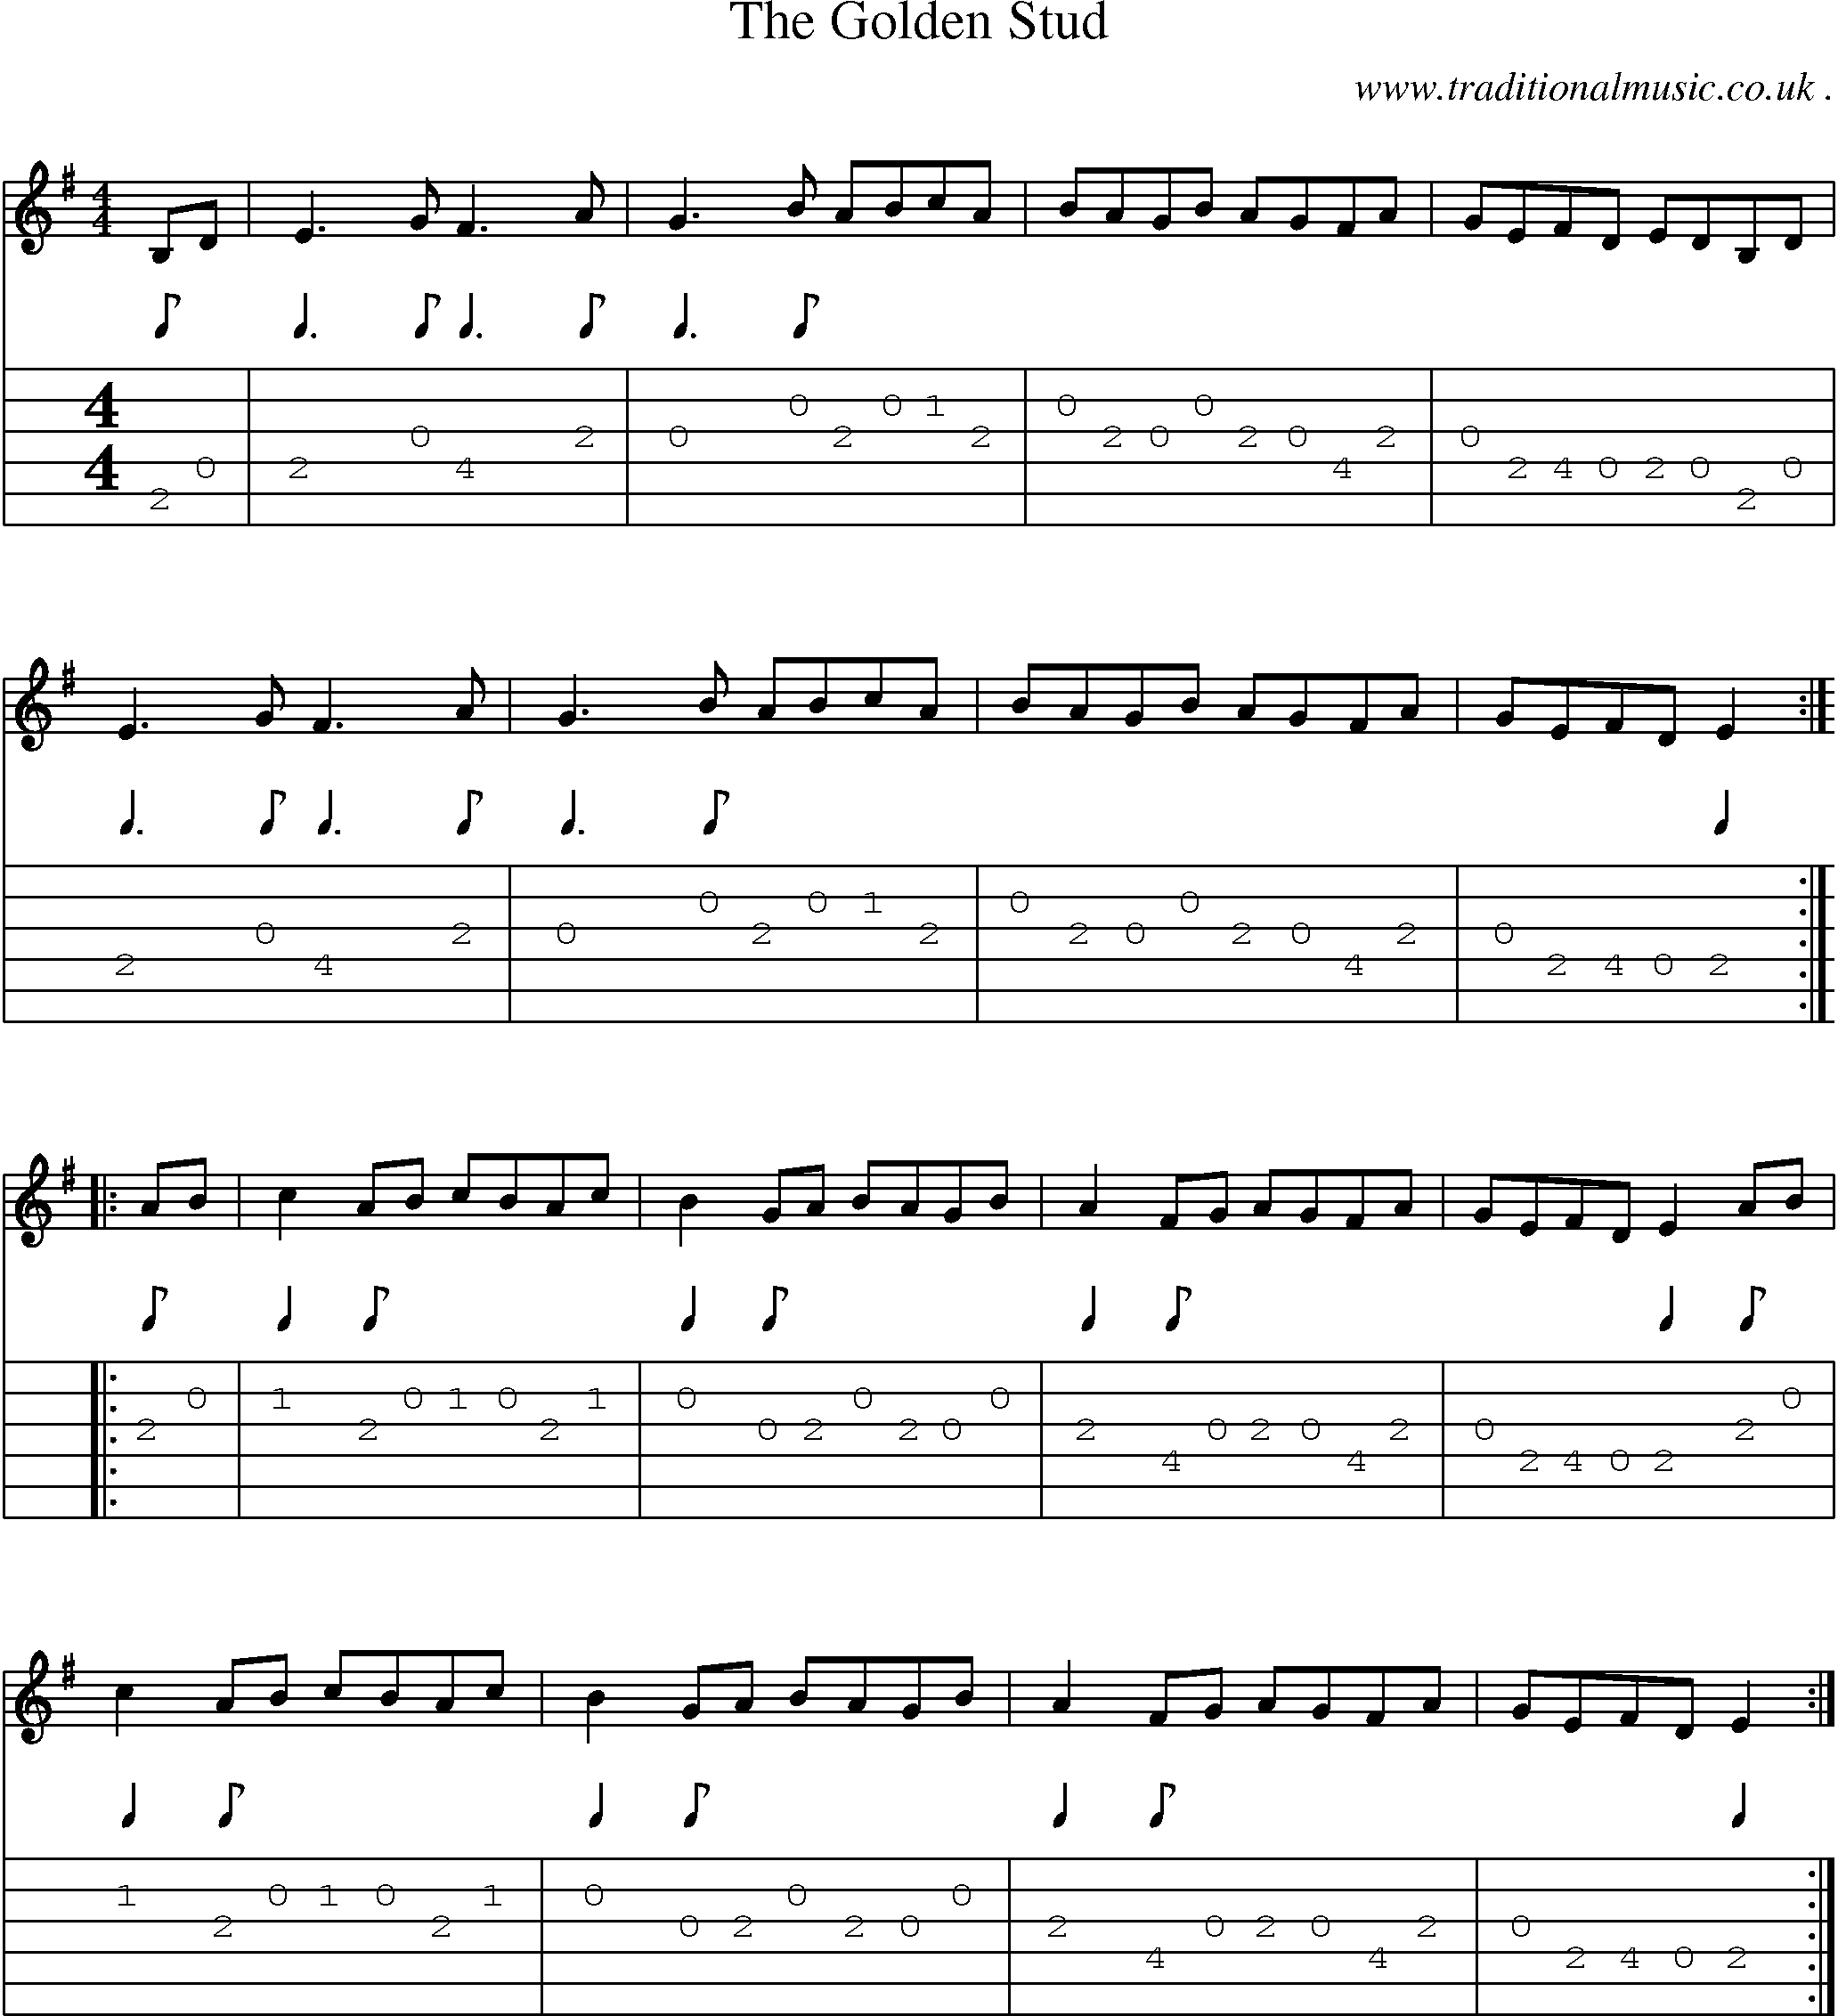 Sheet-Music and Guitar Tabs for The Golden Stud